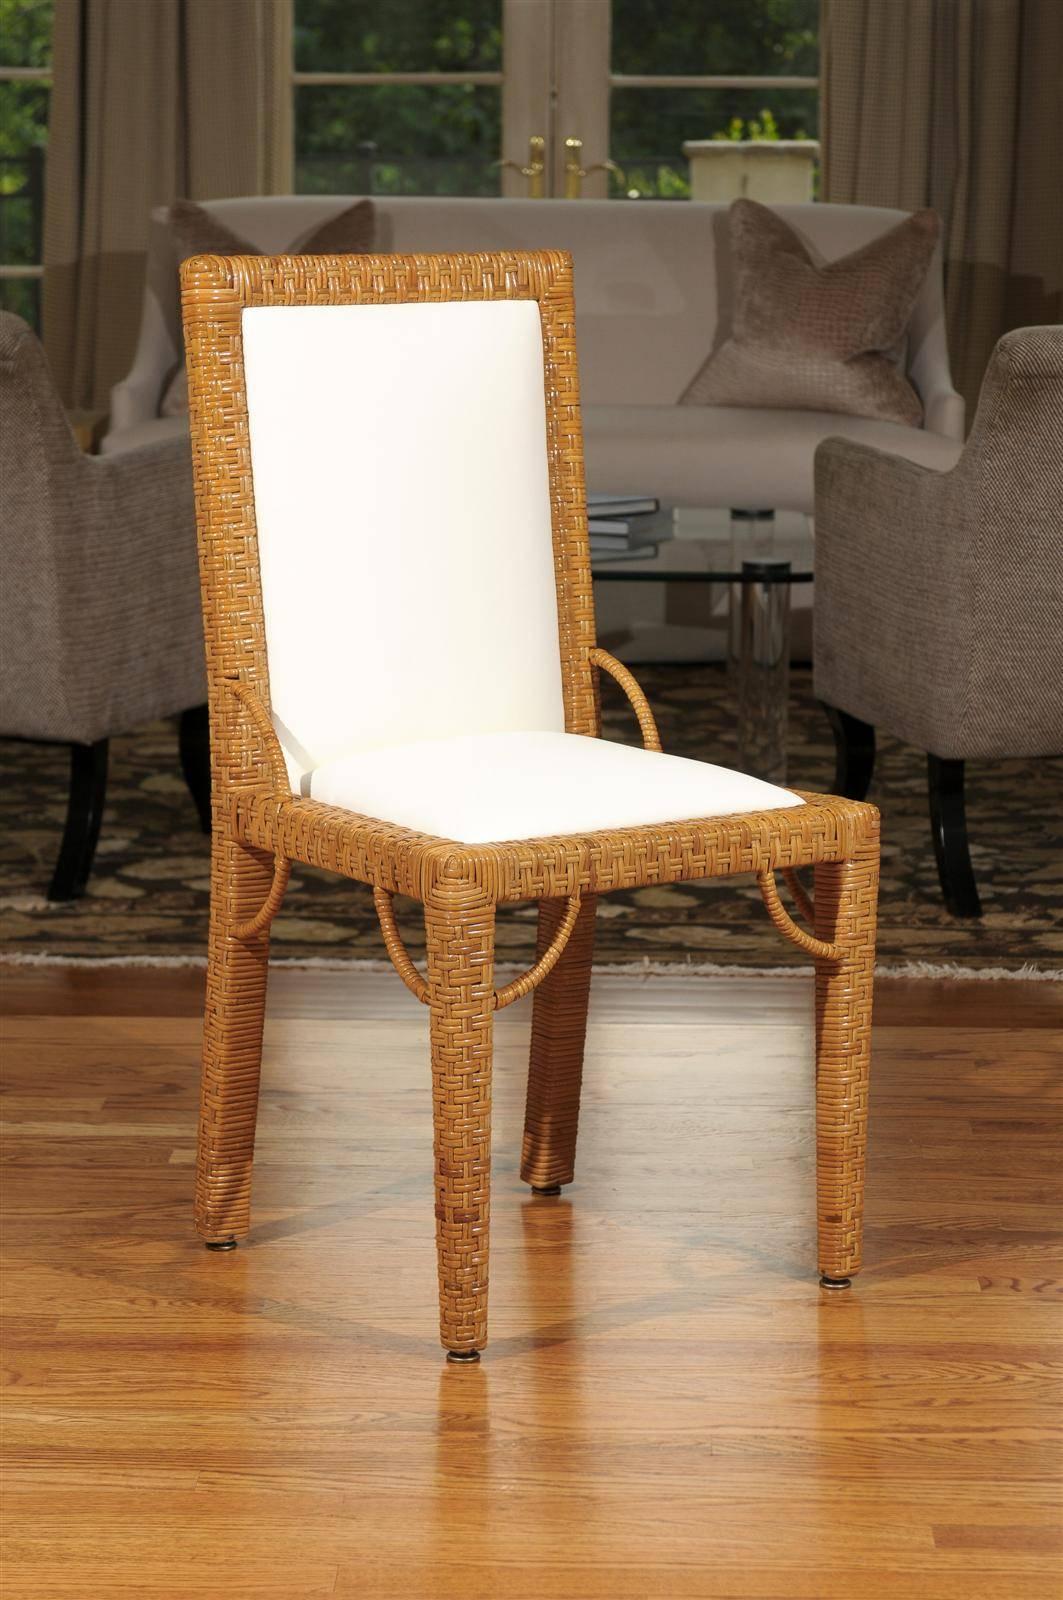 These magnificent dining chairs are shipped as professionally photographed and described in the listing narrative: Completely installation ready.

A stellar set of six (6) Parsons style dining chairs, circa 1975. Stout hardwood frame construction,